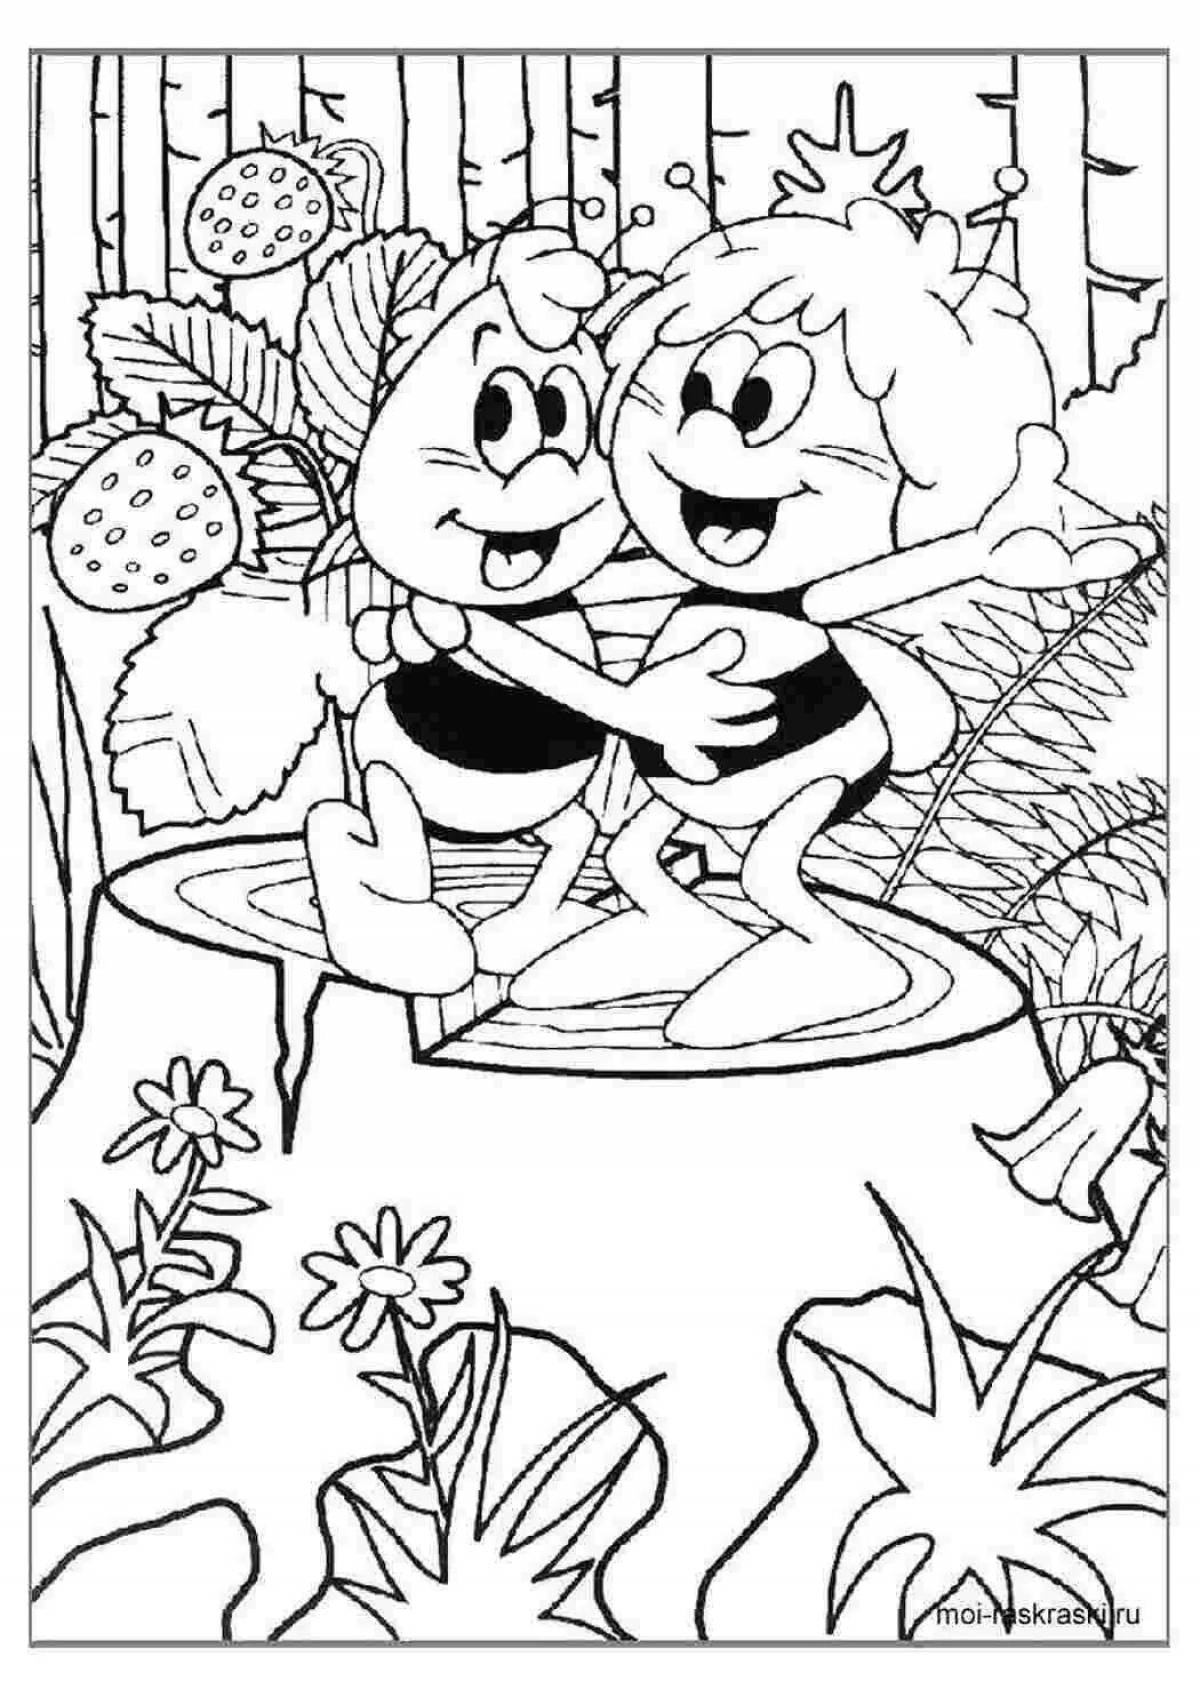 Playful coloring book from modern cartoons